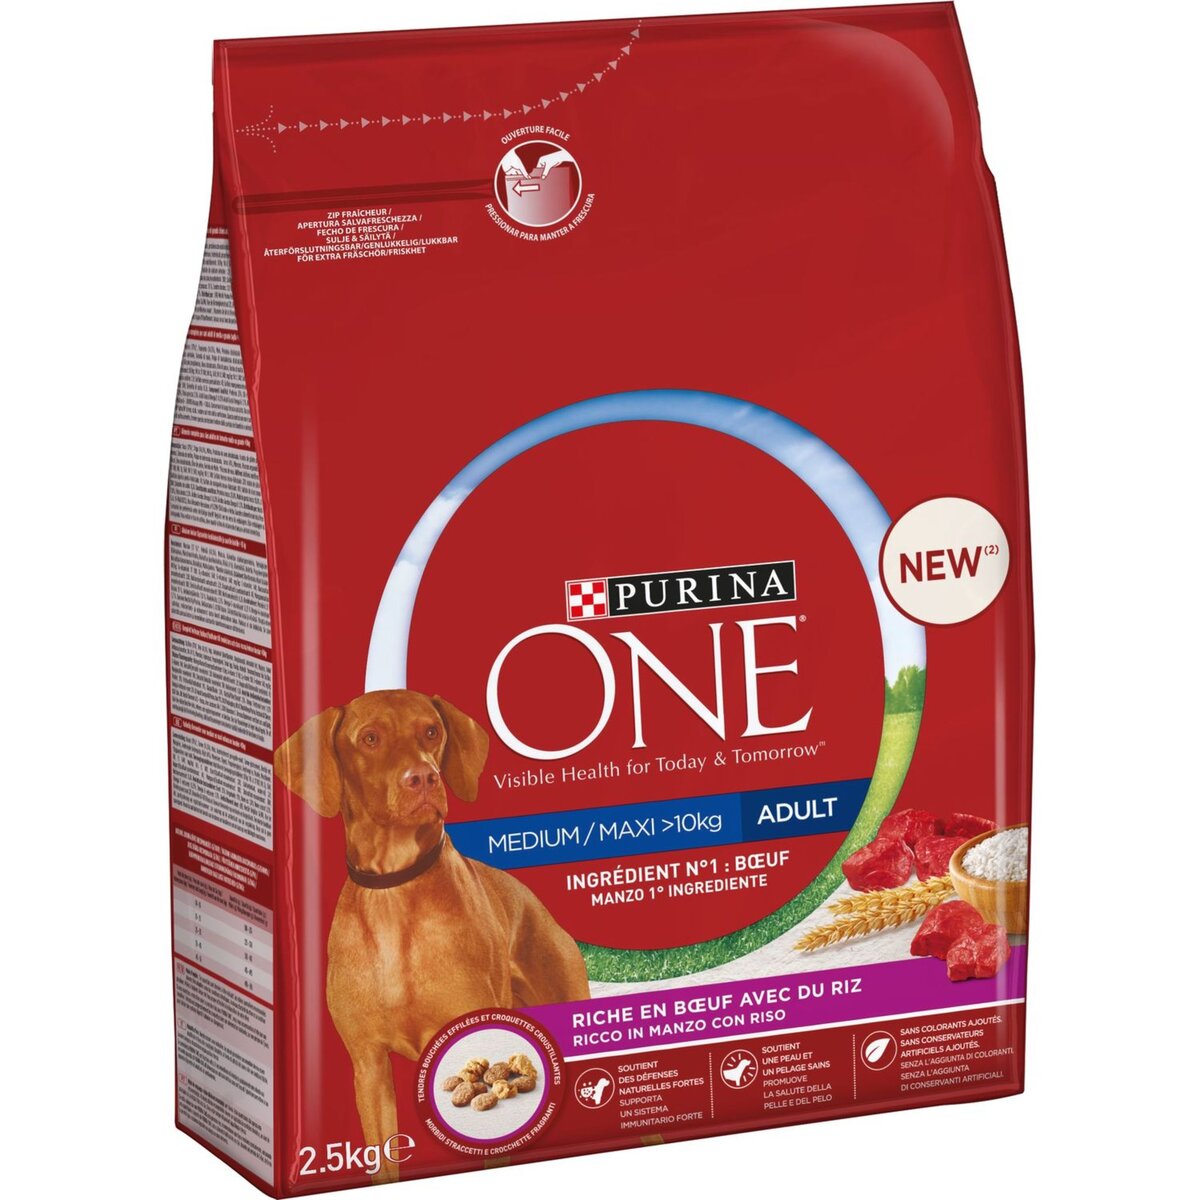 PURINA ONE Purina One chien adulte croquettes boeuf +10kg 2,5kg